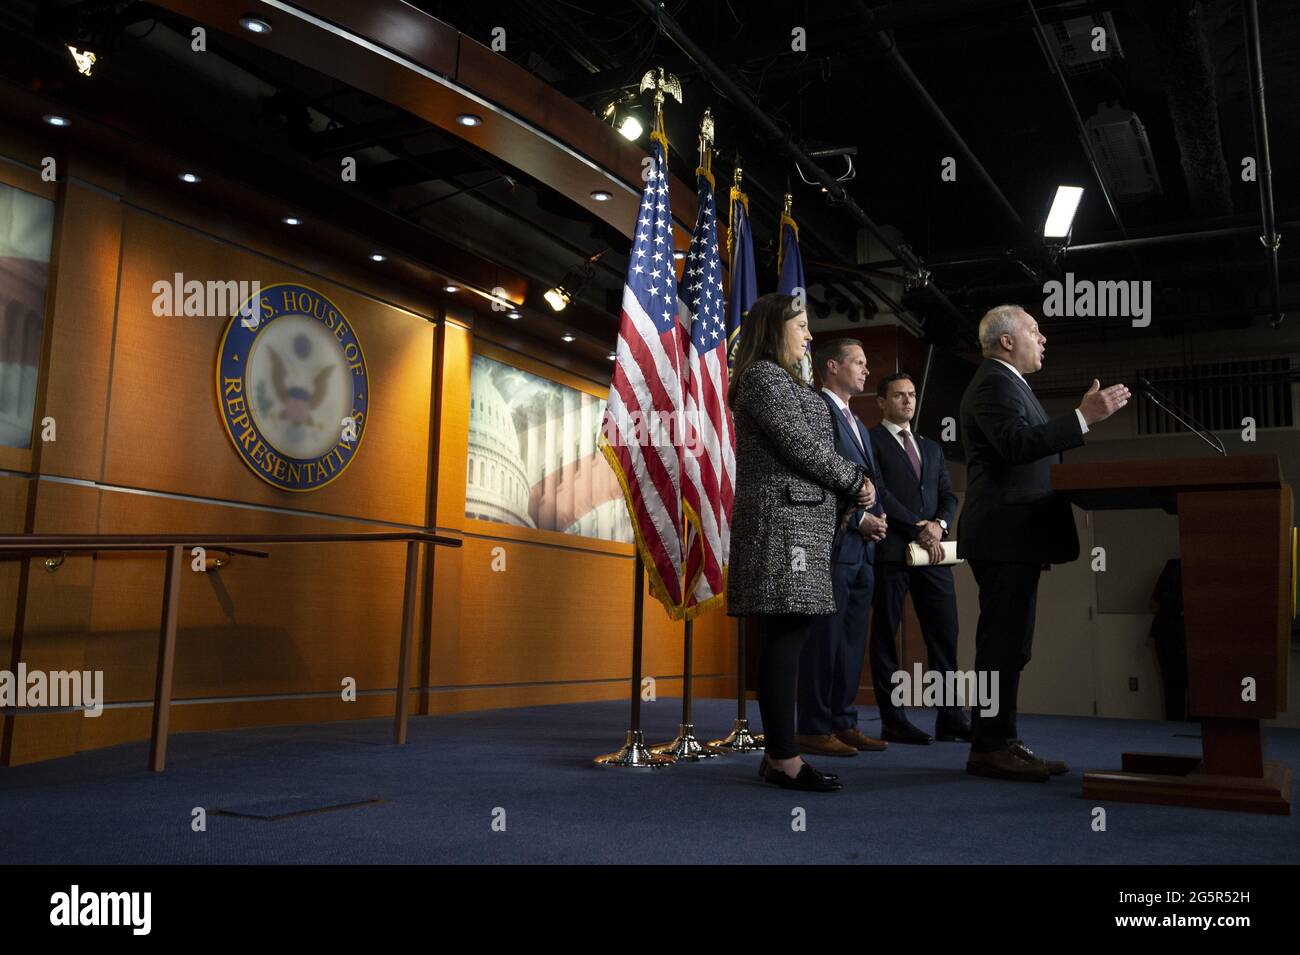 Washington, United States. 29th June, 2021. House Minority Whip Steve Scalise, R-LA, speaks as Rep. Elise Stefanik, R-NY, Rep. Rodney Davis, R-IL, and Rep. Mike Gallagher, R-WI, (L to R) listen during a press conference on the COVID-19 virus, at the U.S. Capitol in Washington, DC., on Tuesday, June 29, 2021. Photo by Bonnie Cash/UPI Credit: UPI/Alamy Live News Stock Photo